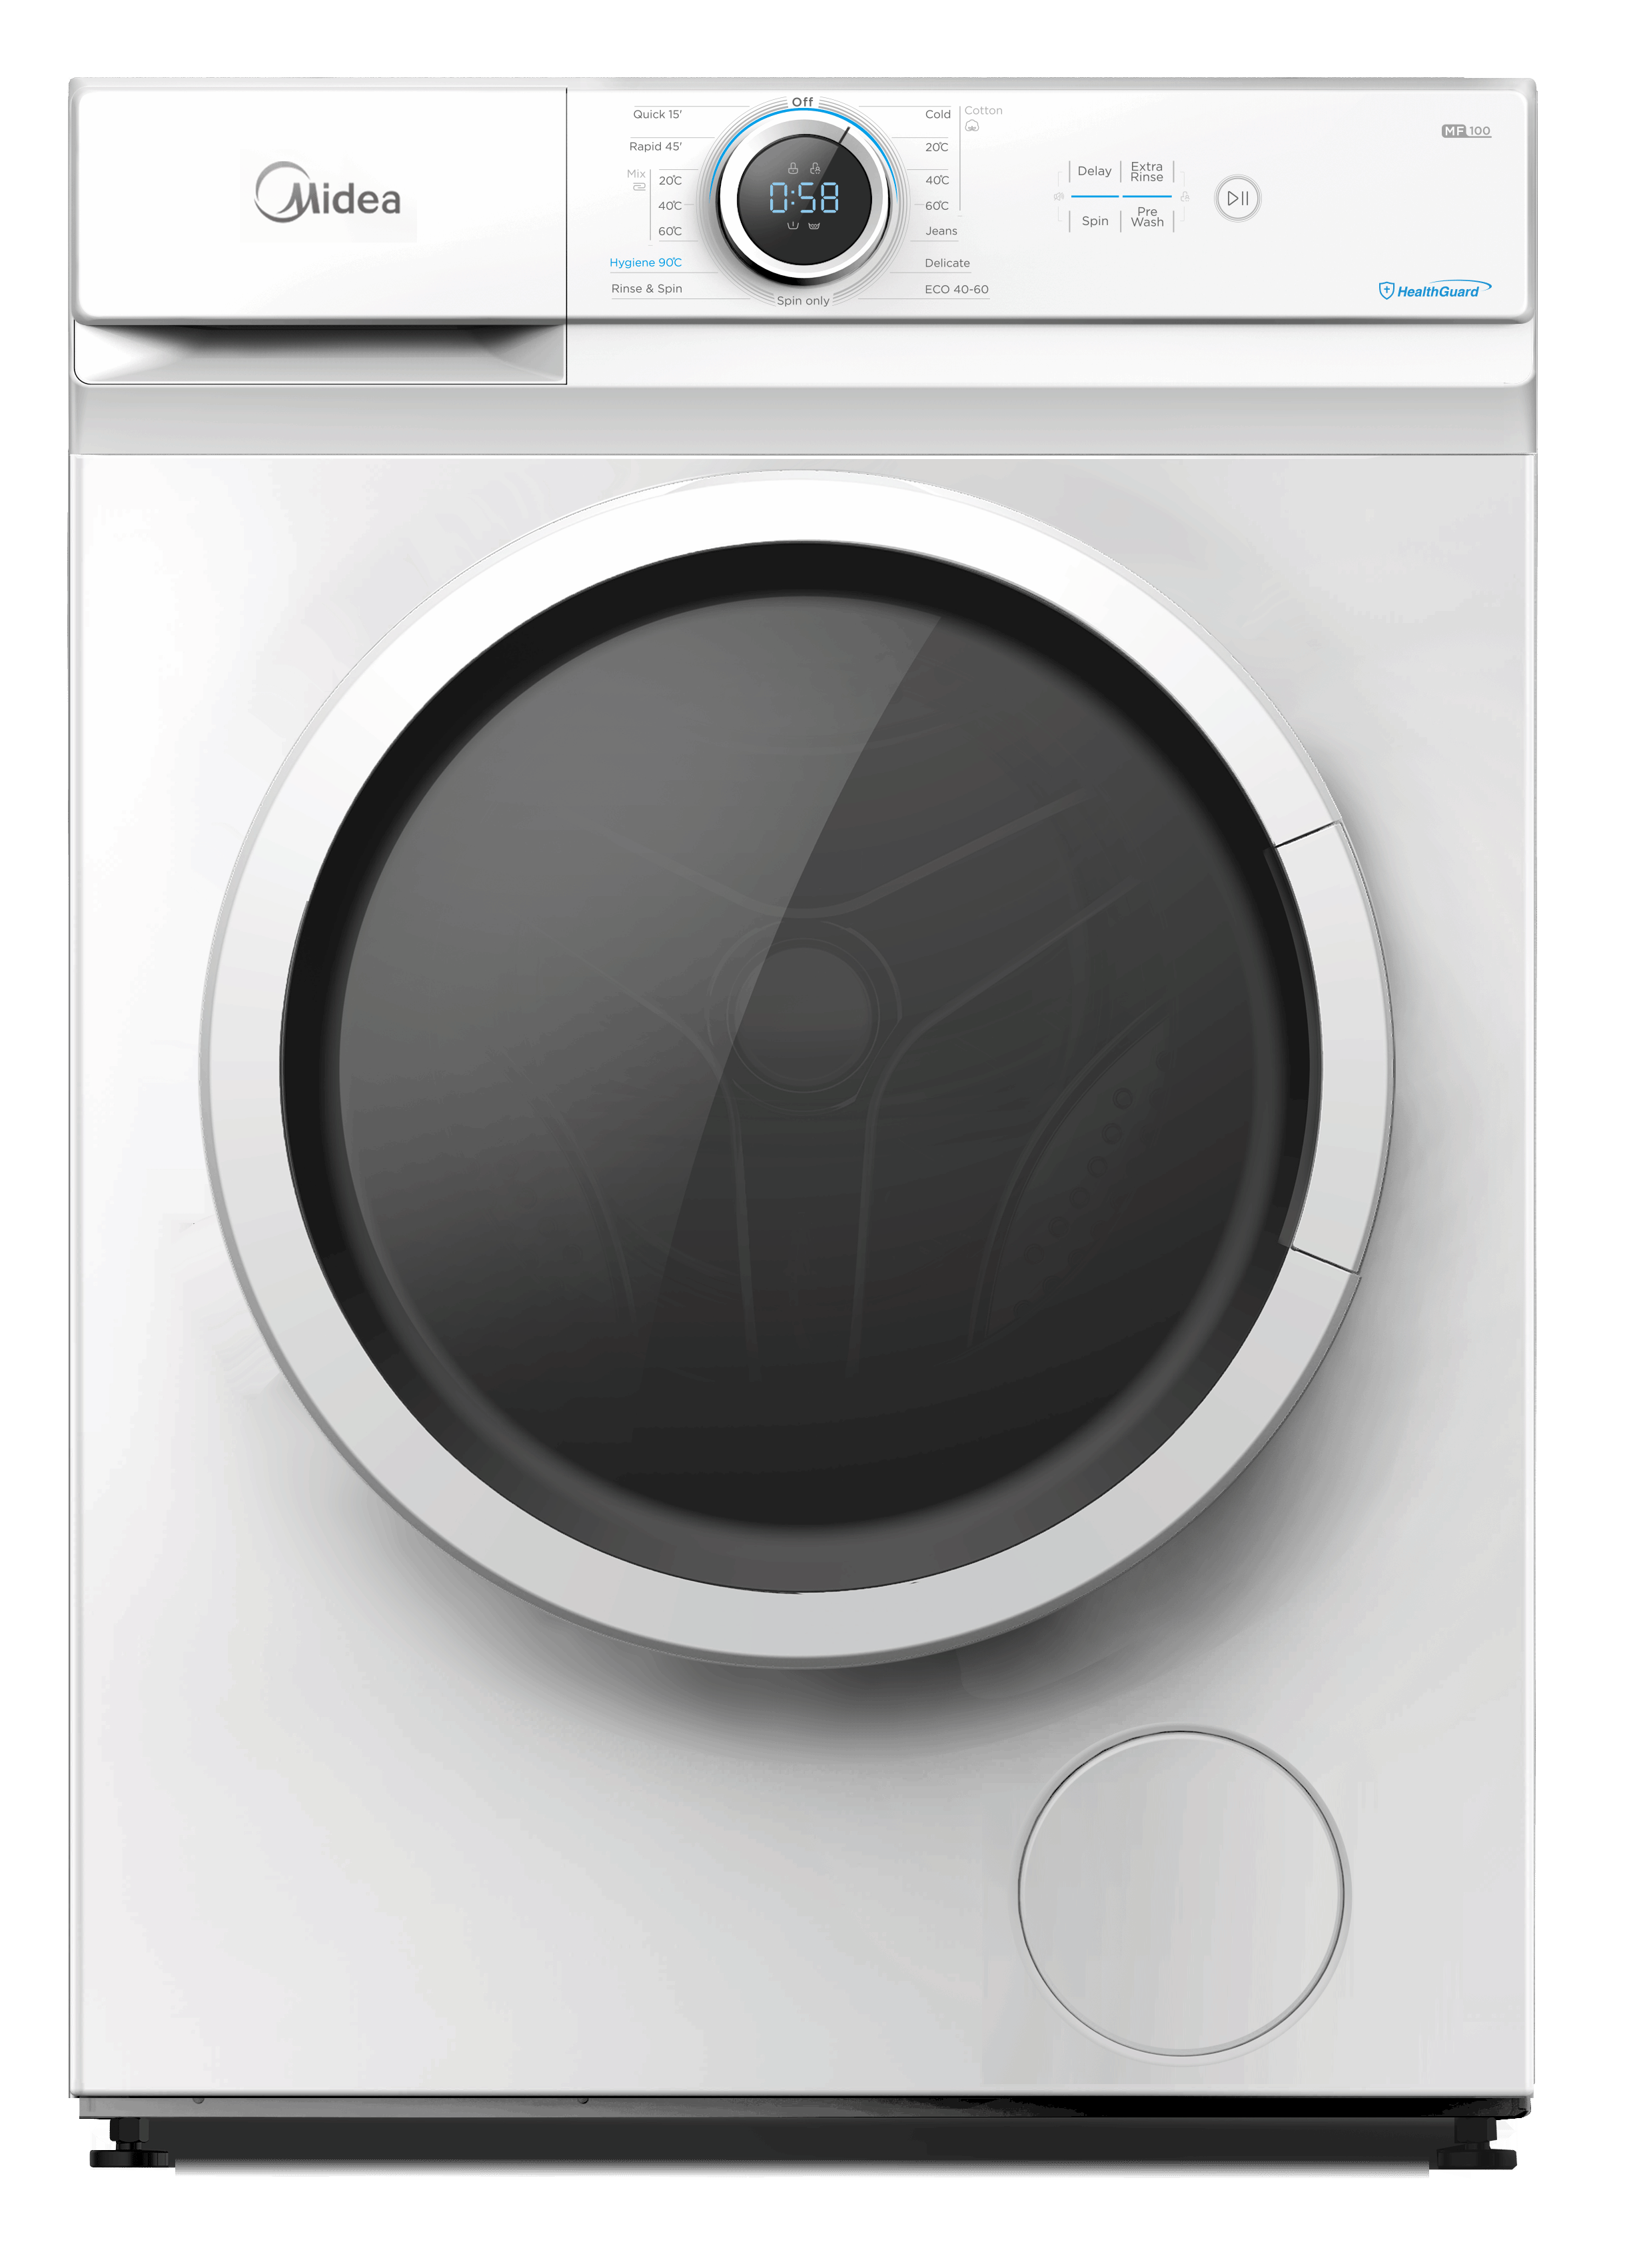 Midea MF100W60 Freestanding Washing Machine, Lunar Dial and LED Display, 6 kg Load, White [Energy Class D ]